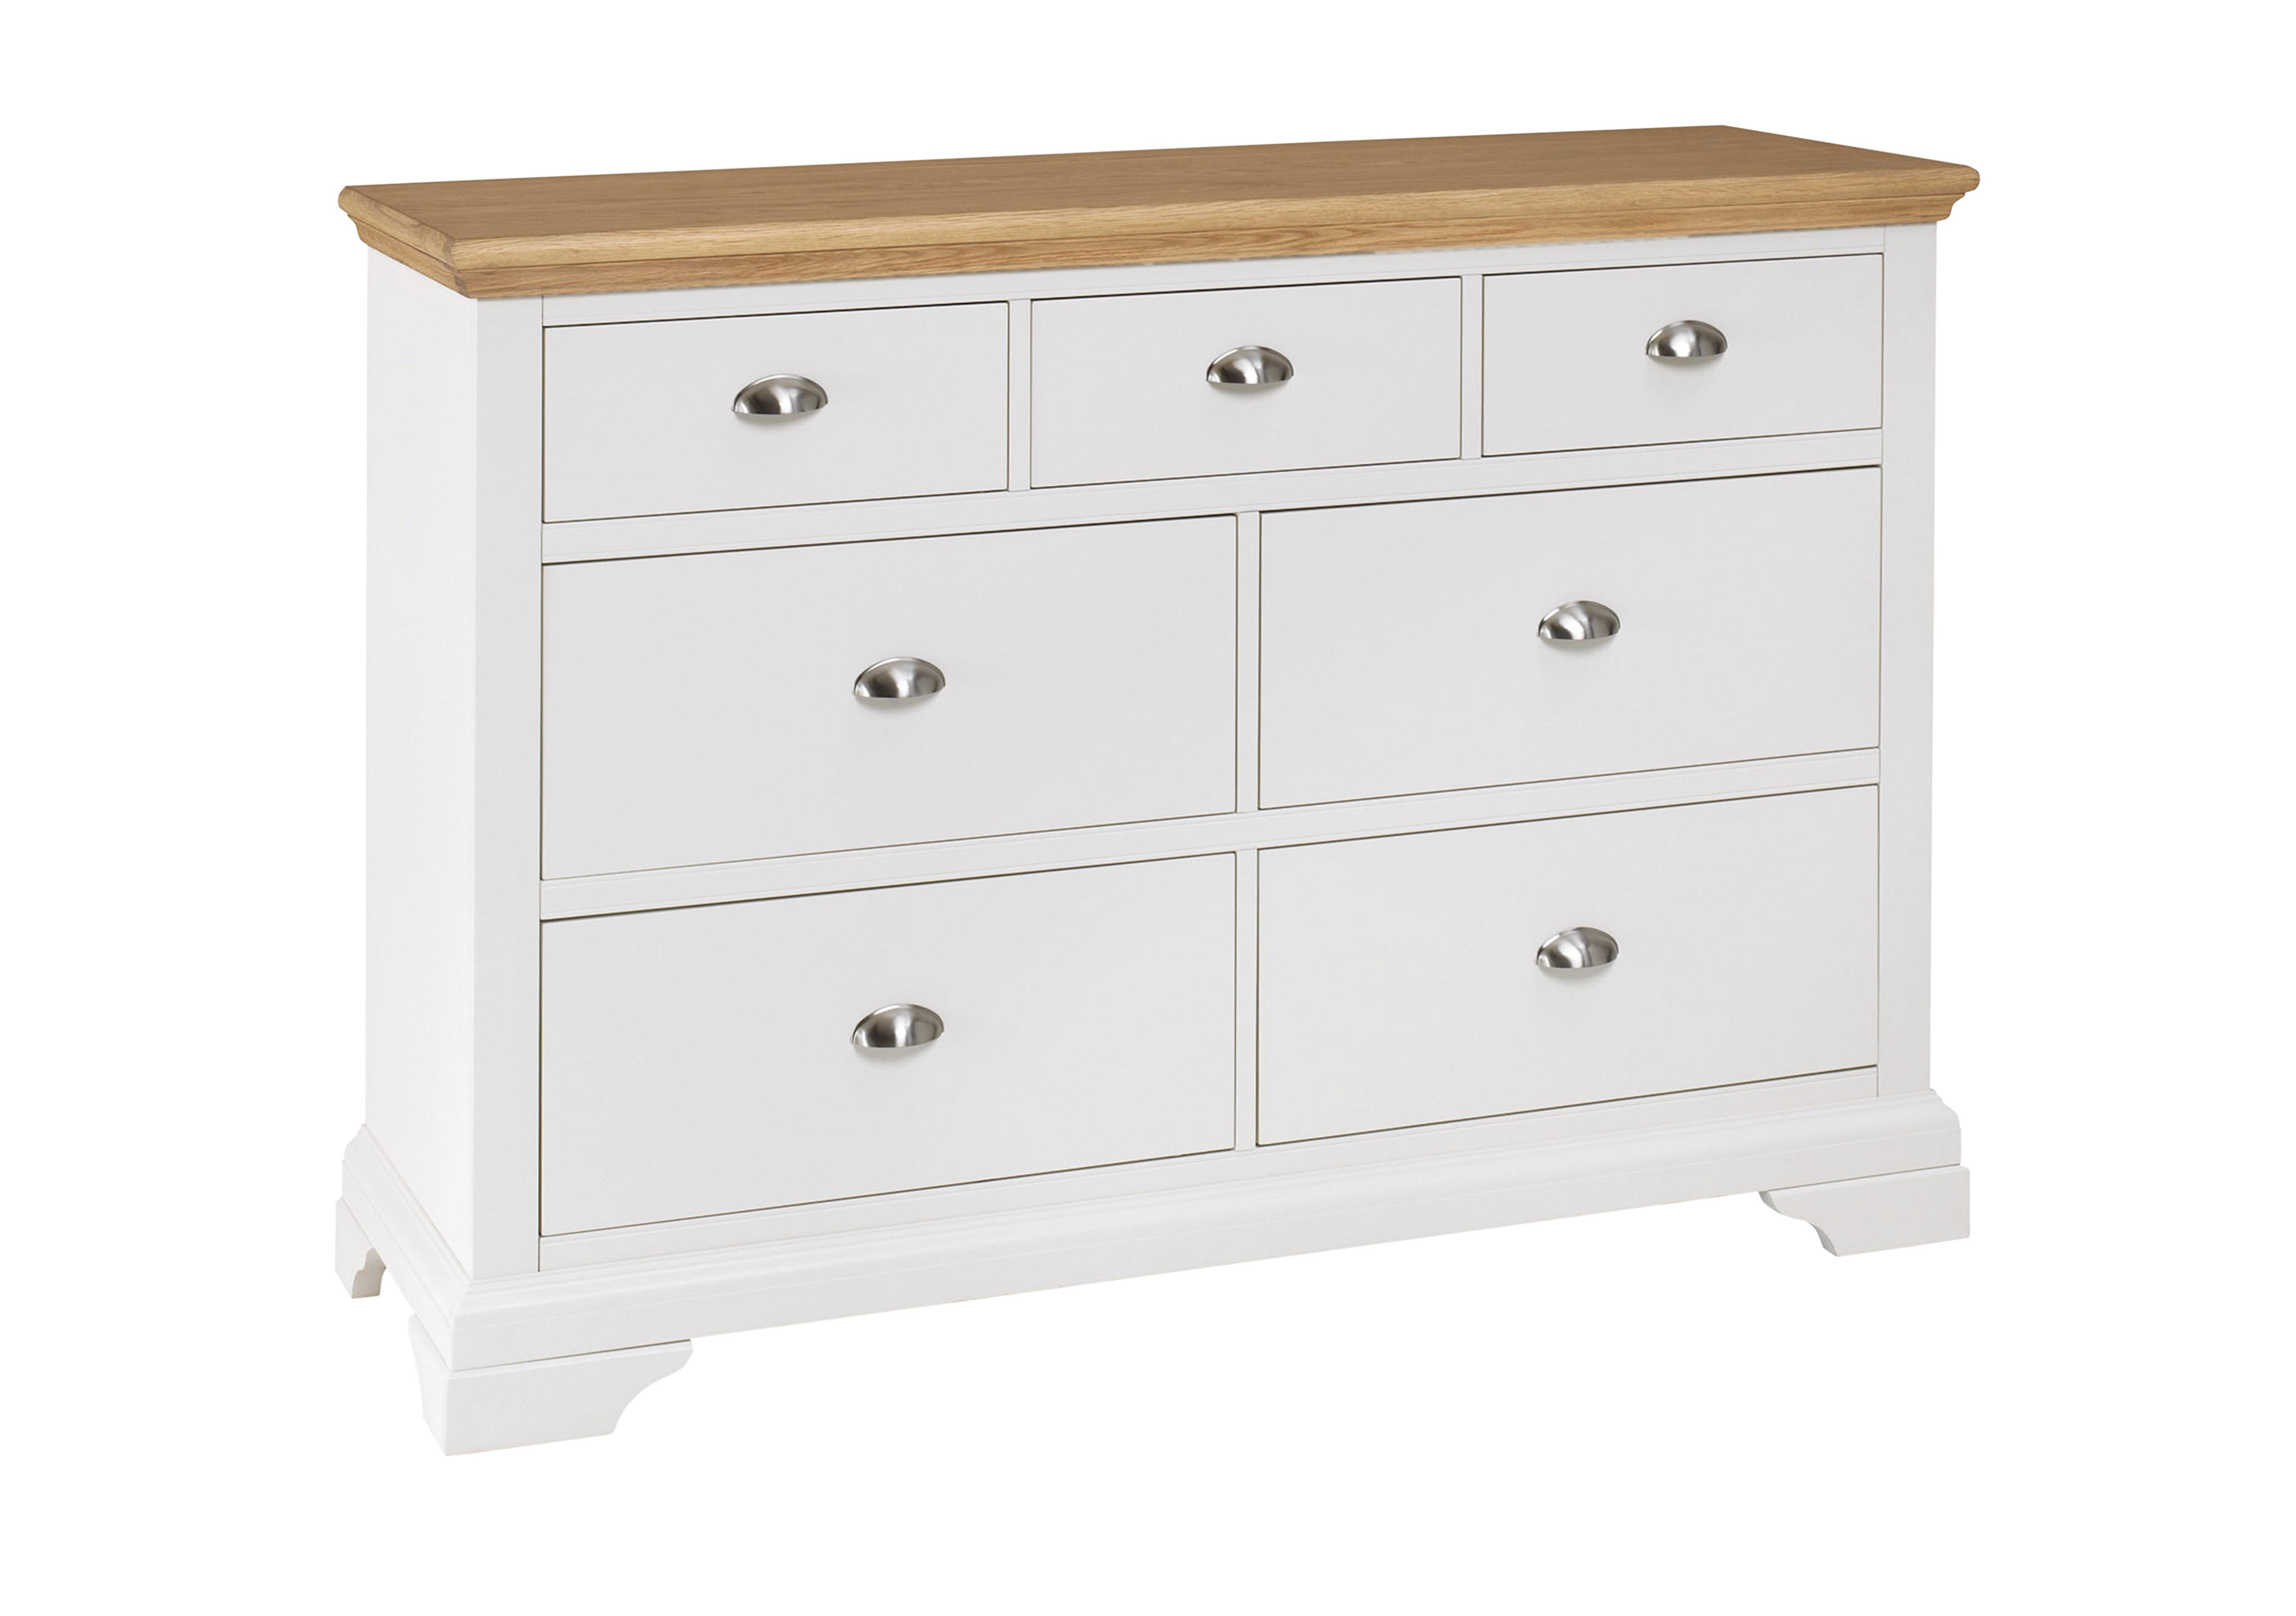 Emily 7 Drawer Chest in Ivory And Oak on Furniture Village